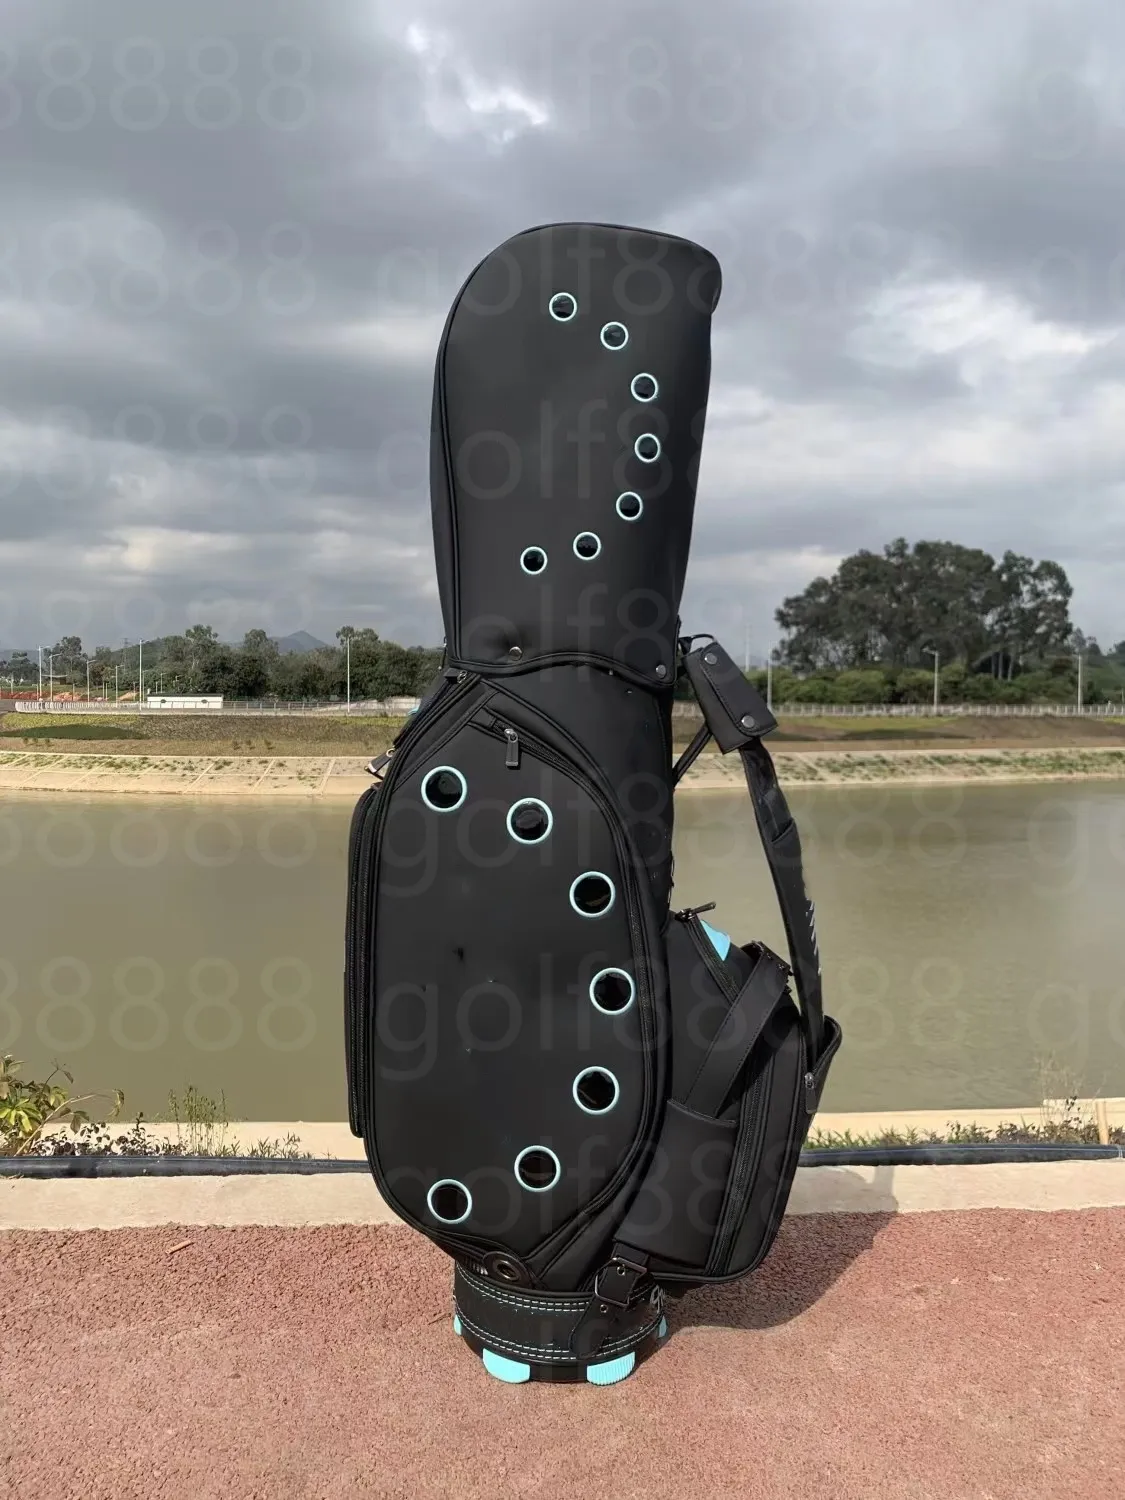 Bags Black Golf Cart Bags Ultra-Light, Frosted, Waterproof Leave Us A Message For More Details And Pictures nd